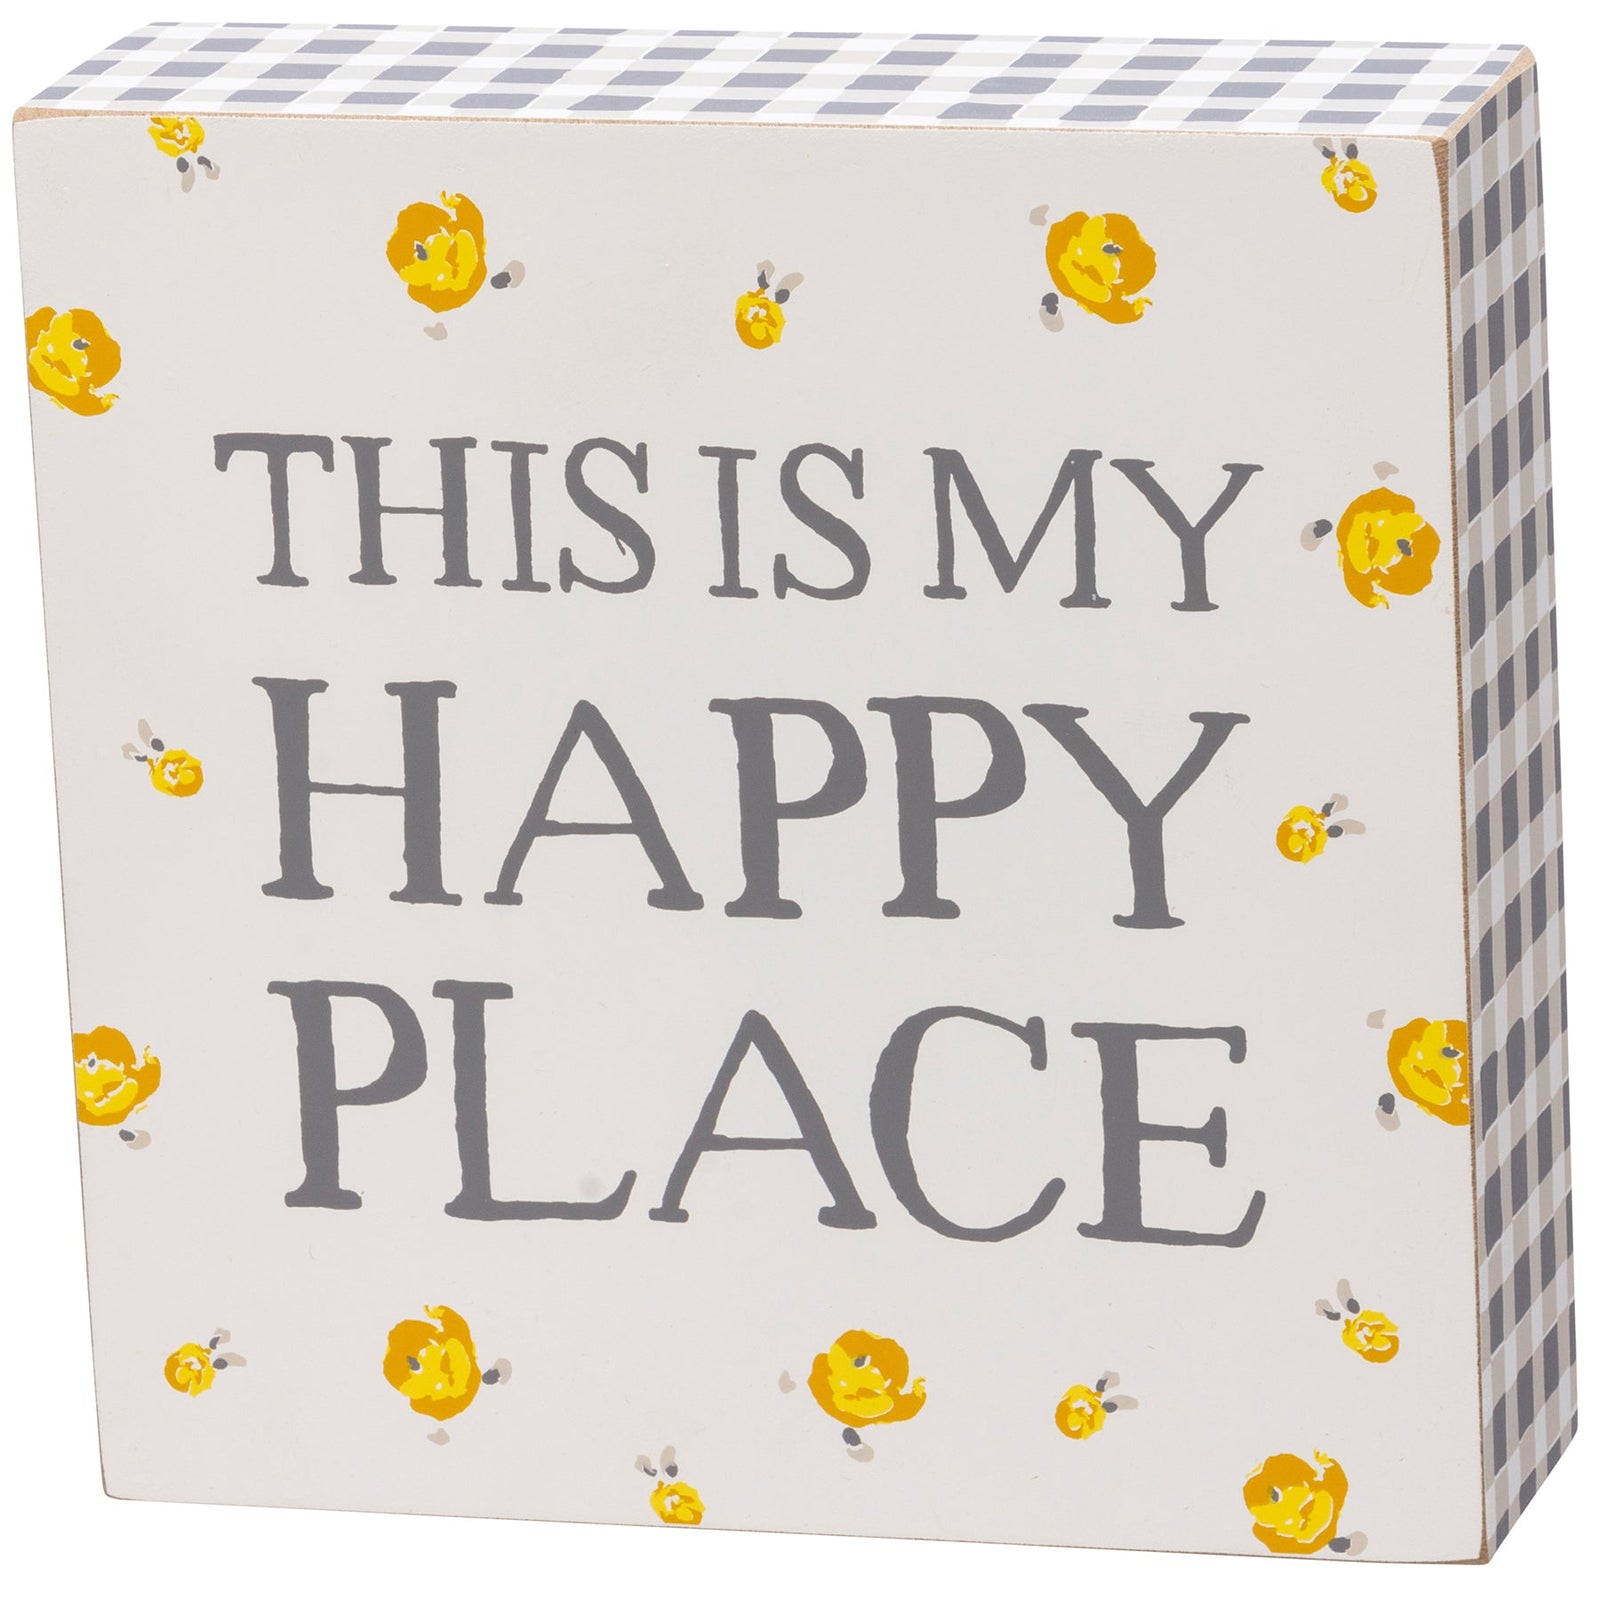 This Is My Happy Place Watercolor Box Sign | Home Wooden Sign Decor Display | 6" x 6"